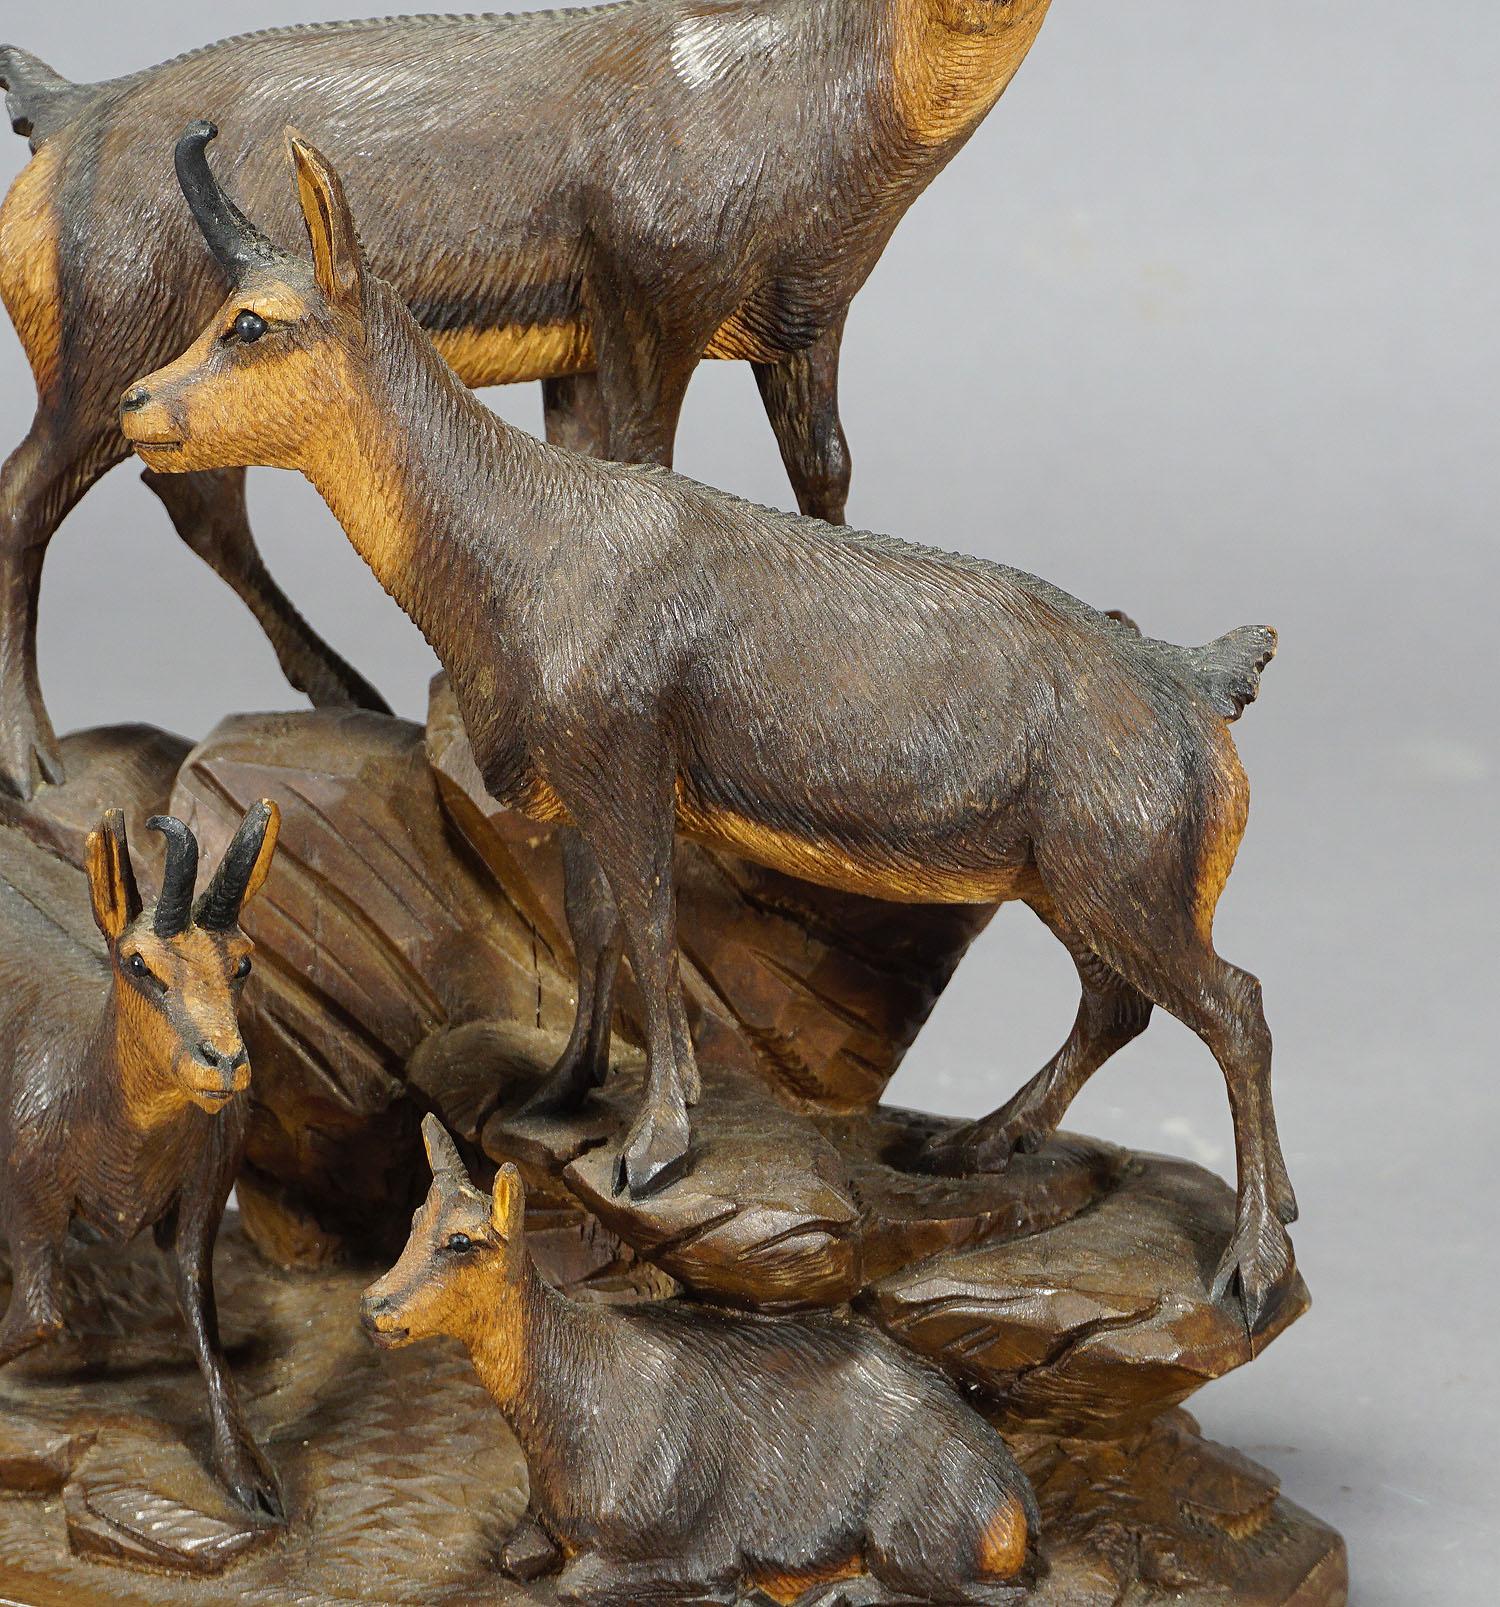 A delicately hand-carved wood sculpture of a chamois family. The item is very detailed and a classical natural carving by the Austrian woodcarver Ernst Heissl, ca. 1900.

The tradition of wood carving, using manual skills to make everyday objects